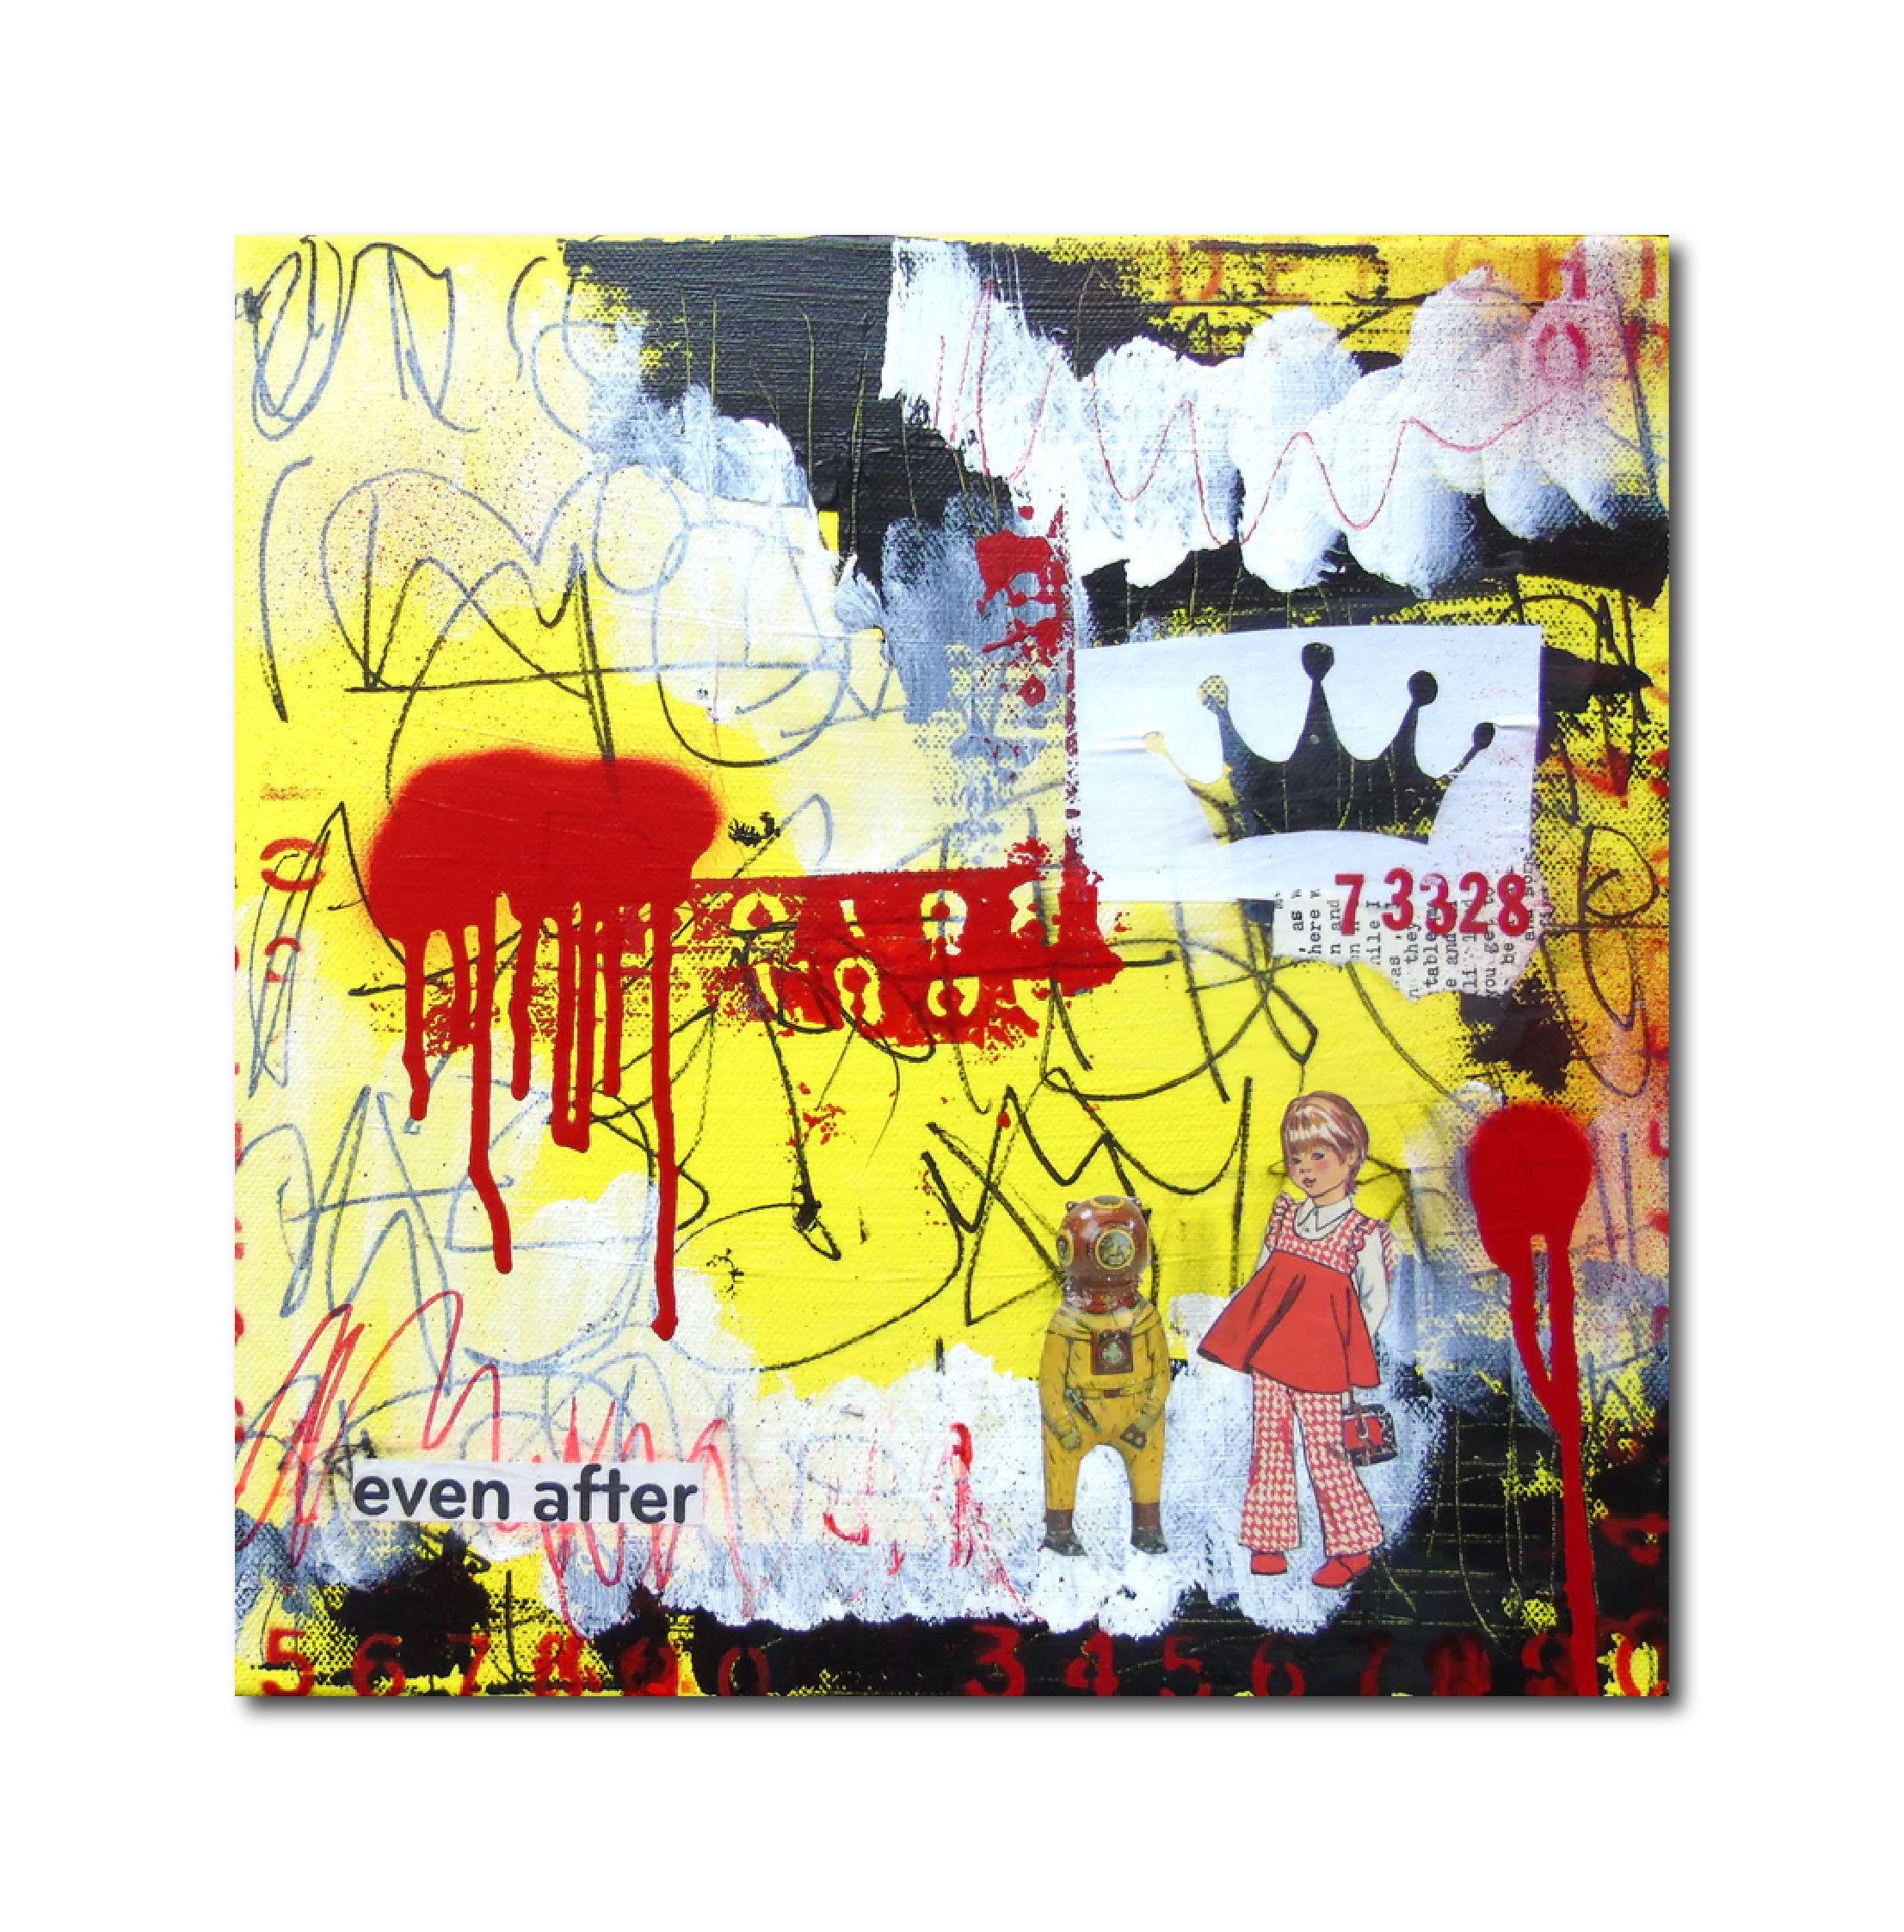 'EVEN AFTER' - Mixed media on canvas